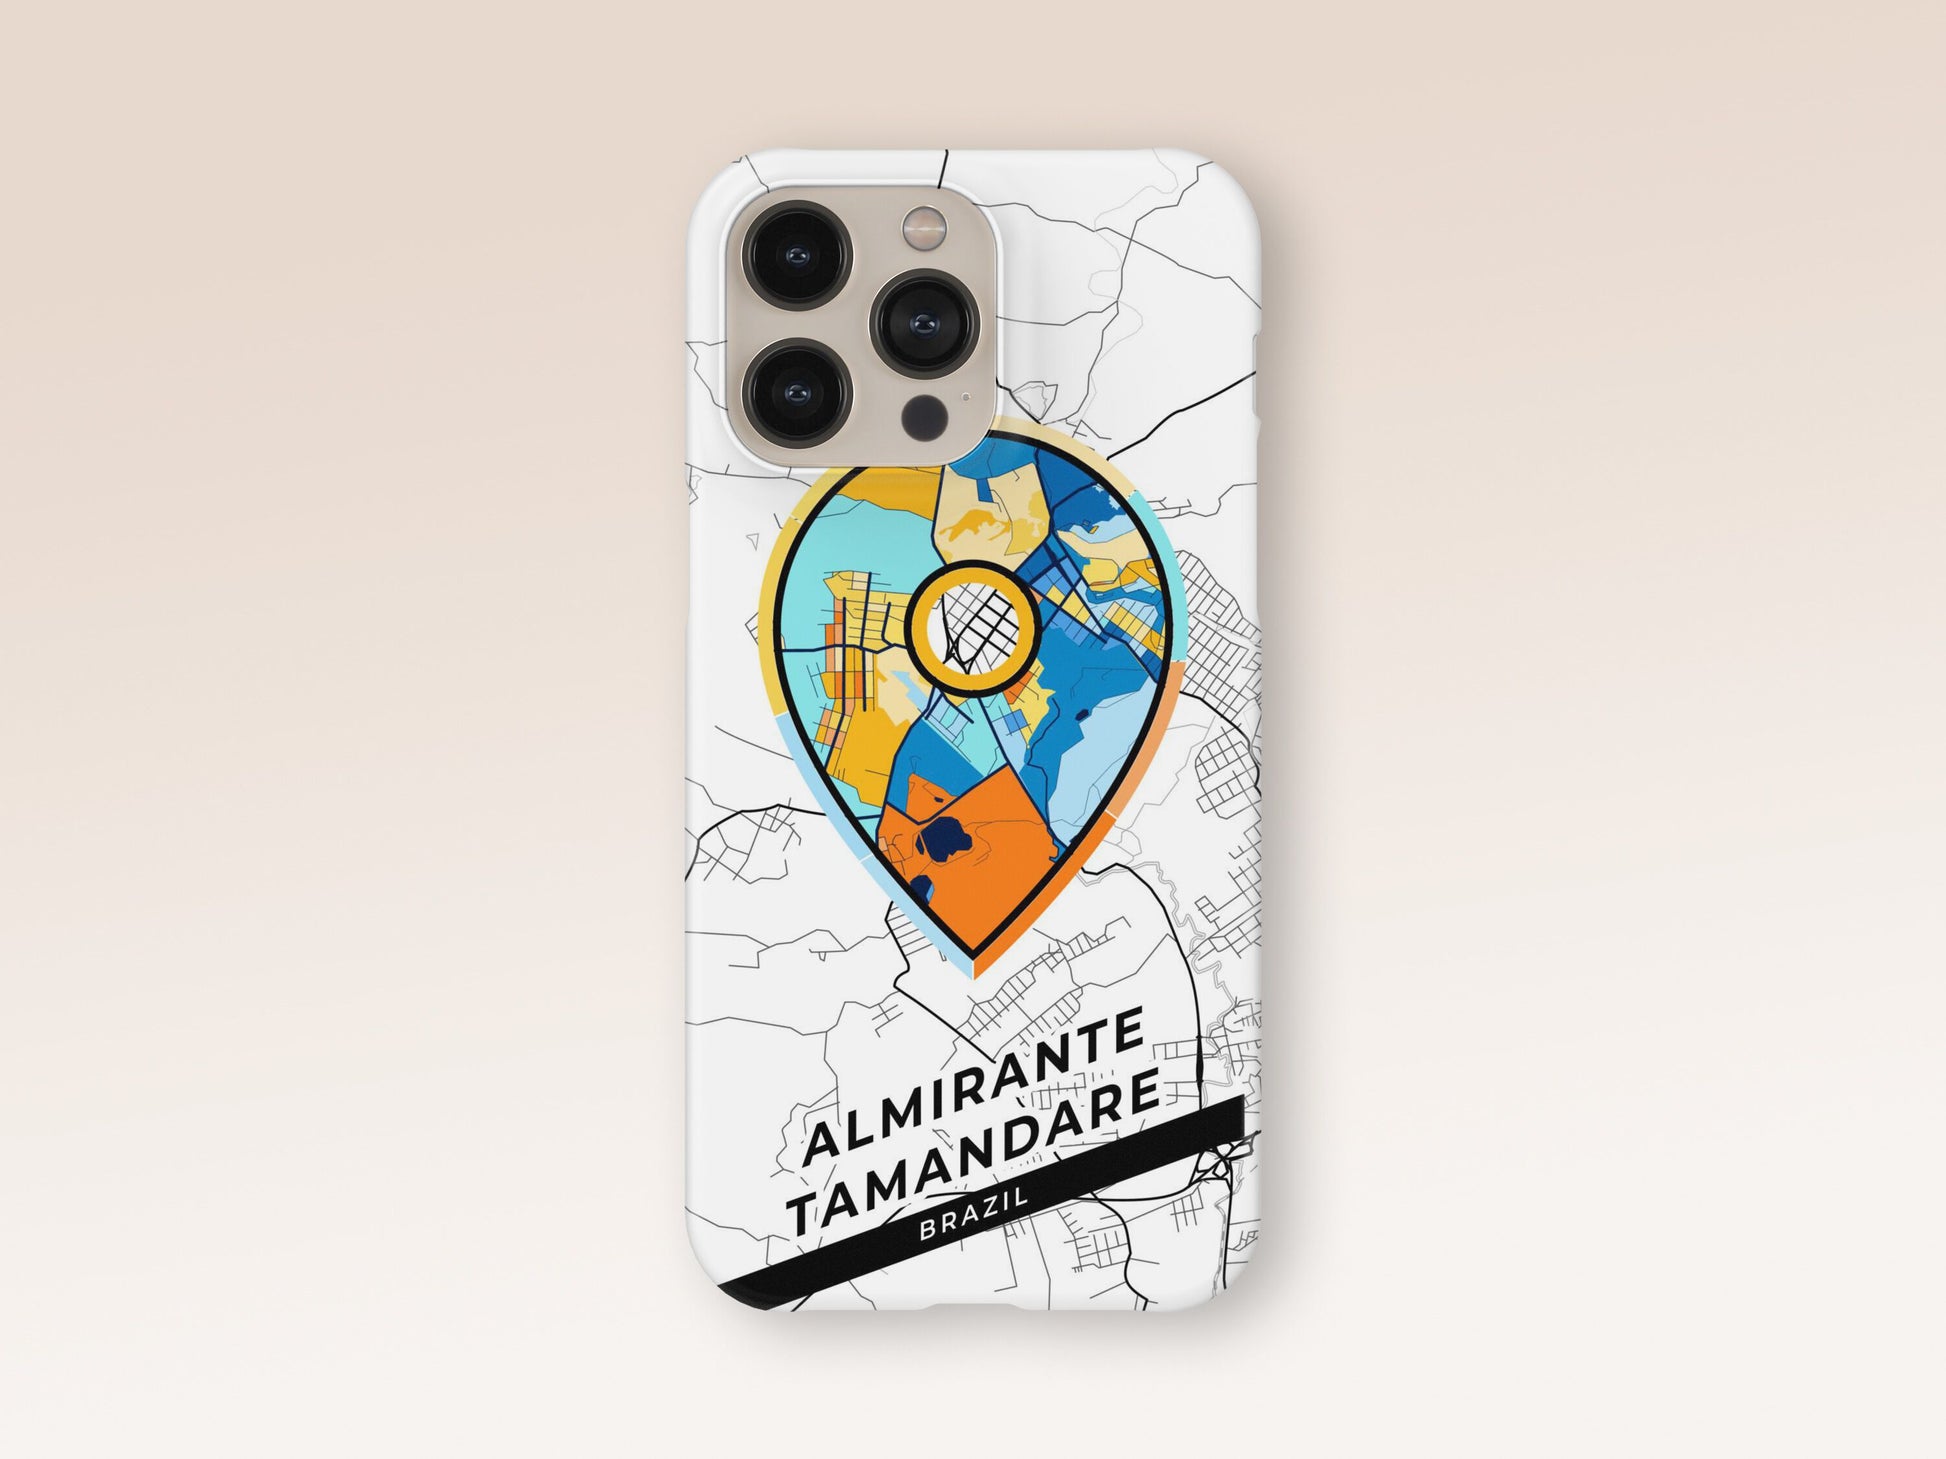 Almirante Tamandare Brazil slim phone case with colorful icon. Birthday, wedding or housewarming gift. Couple match cases. 1